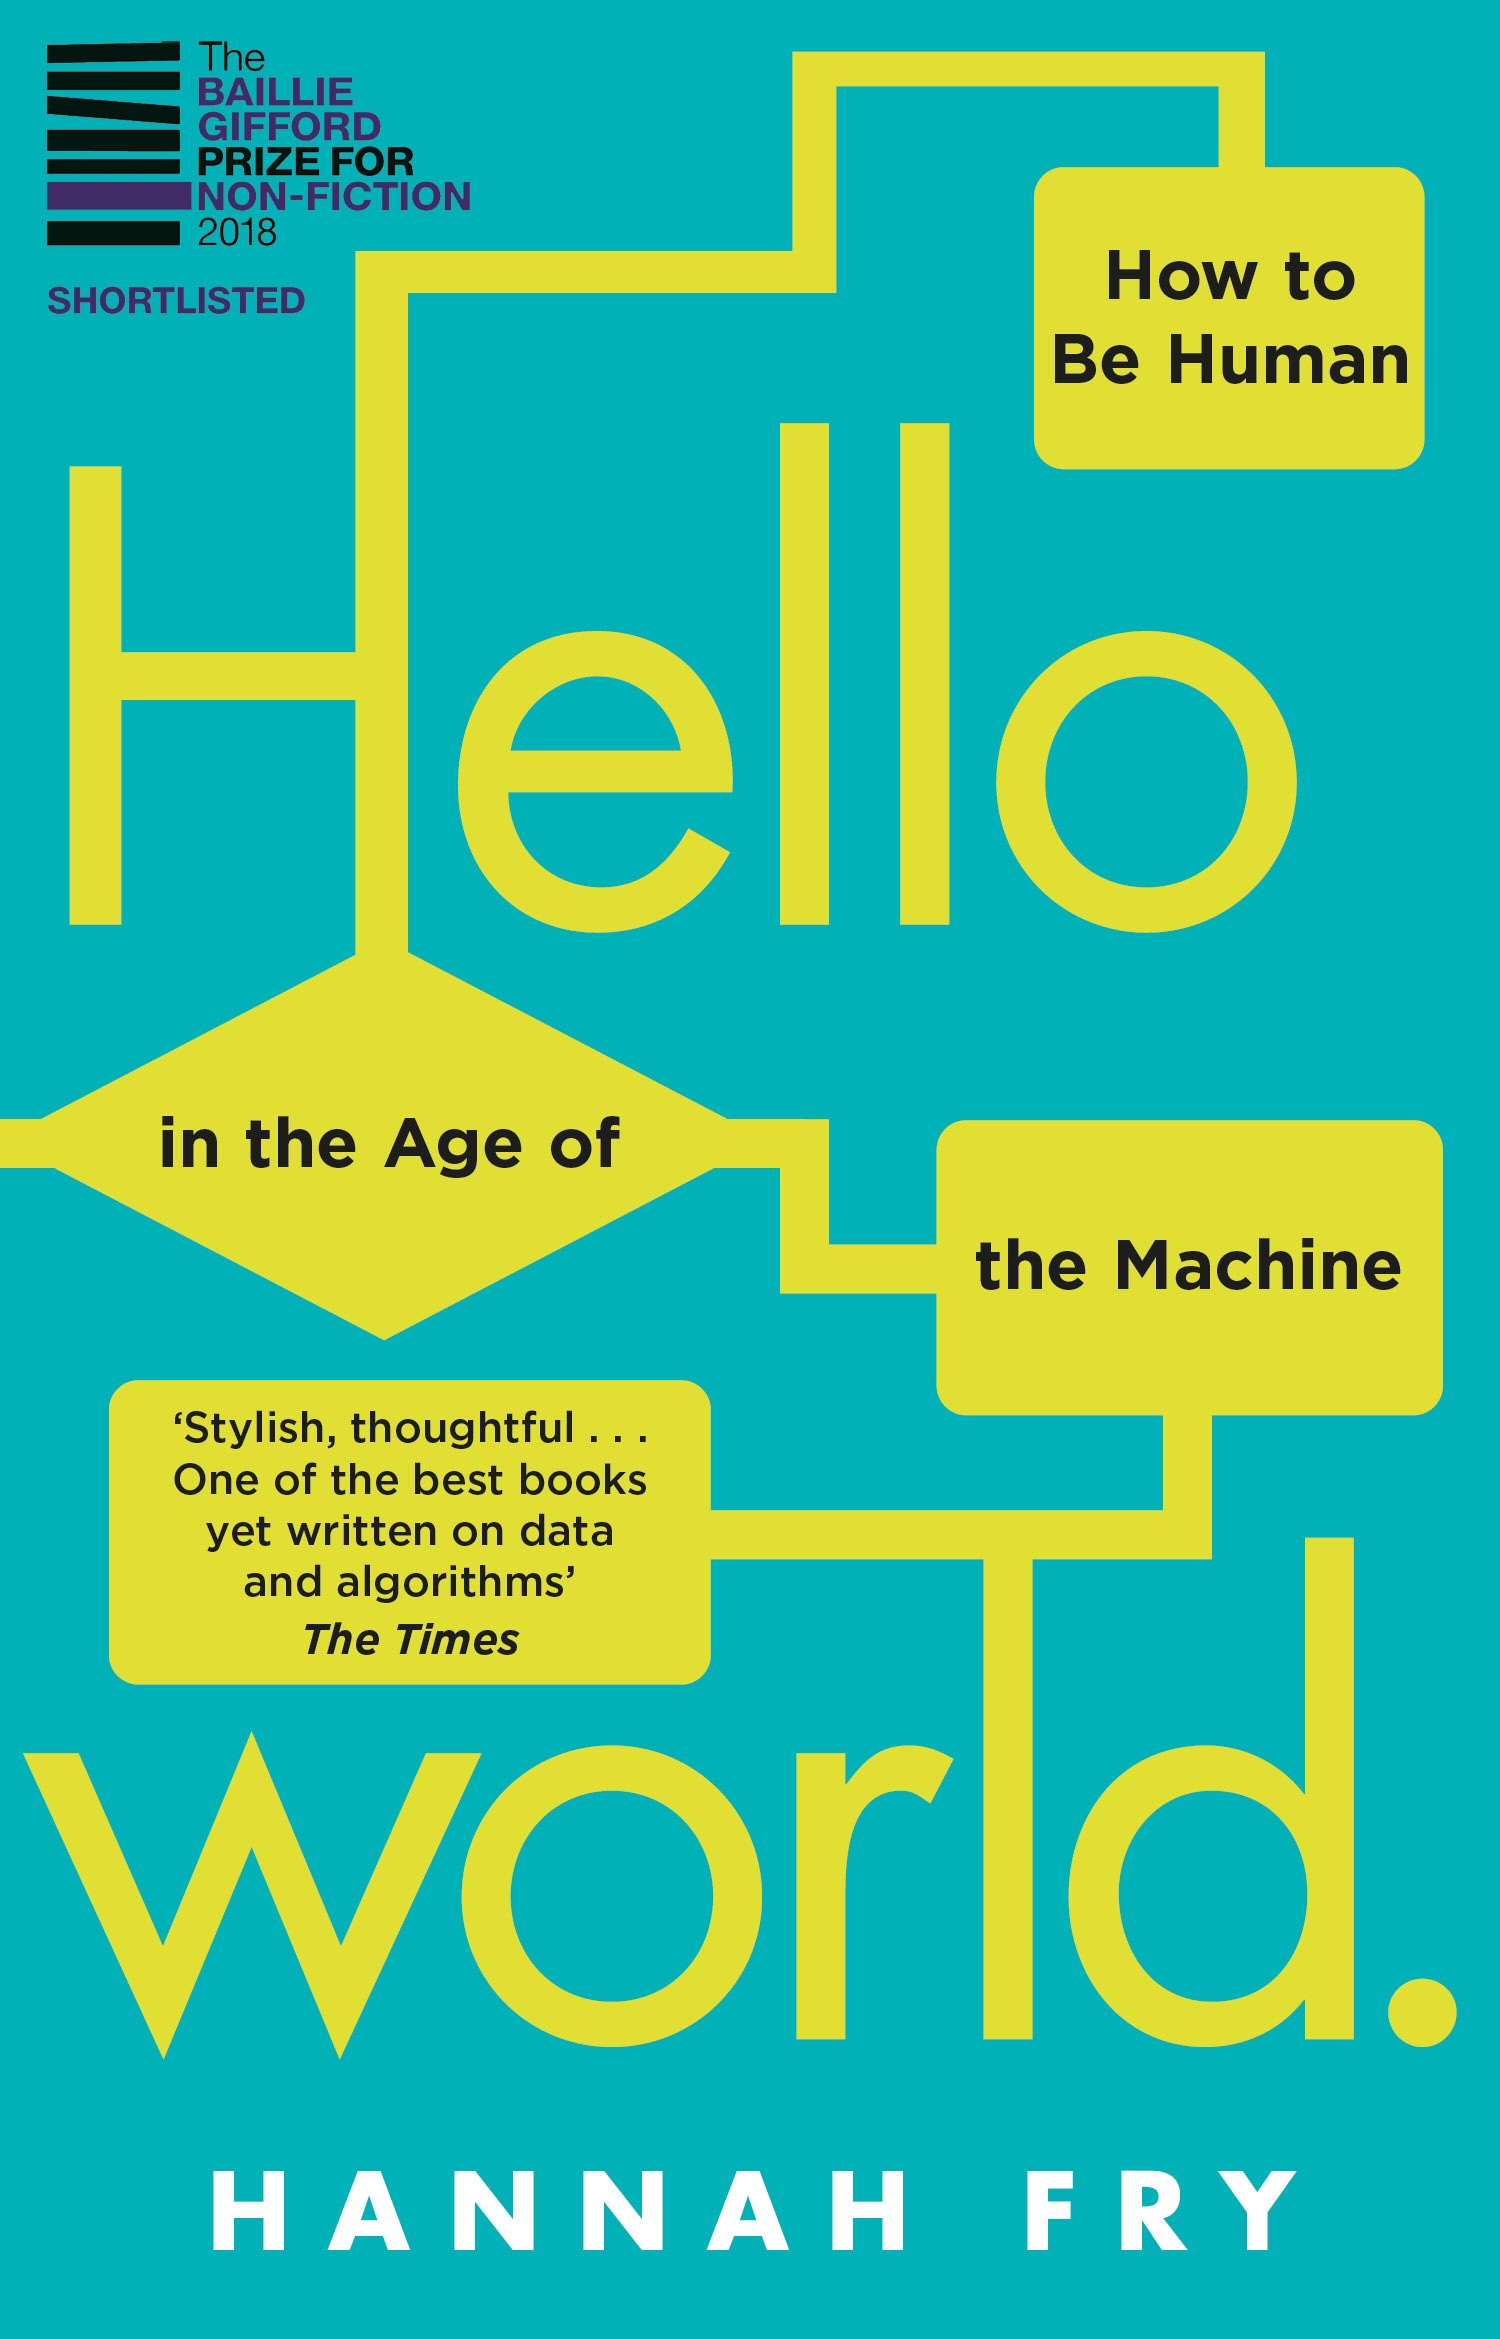 Book “Hello World” by Hannah Fry — March 28, 2019